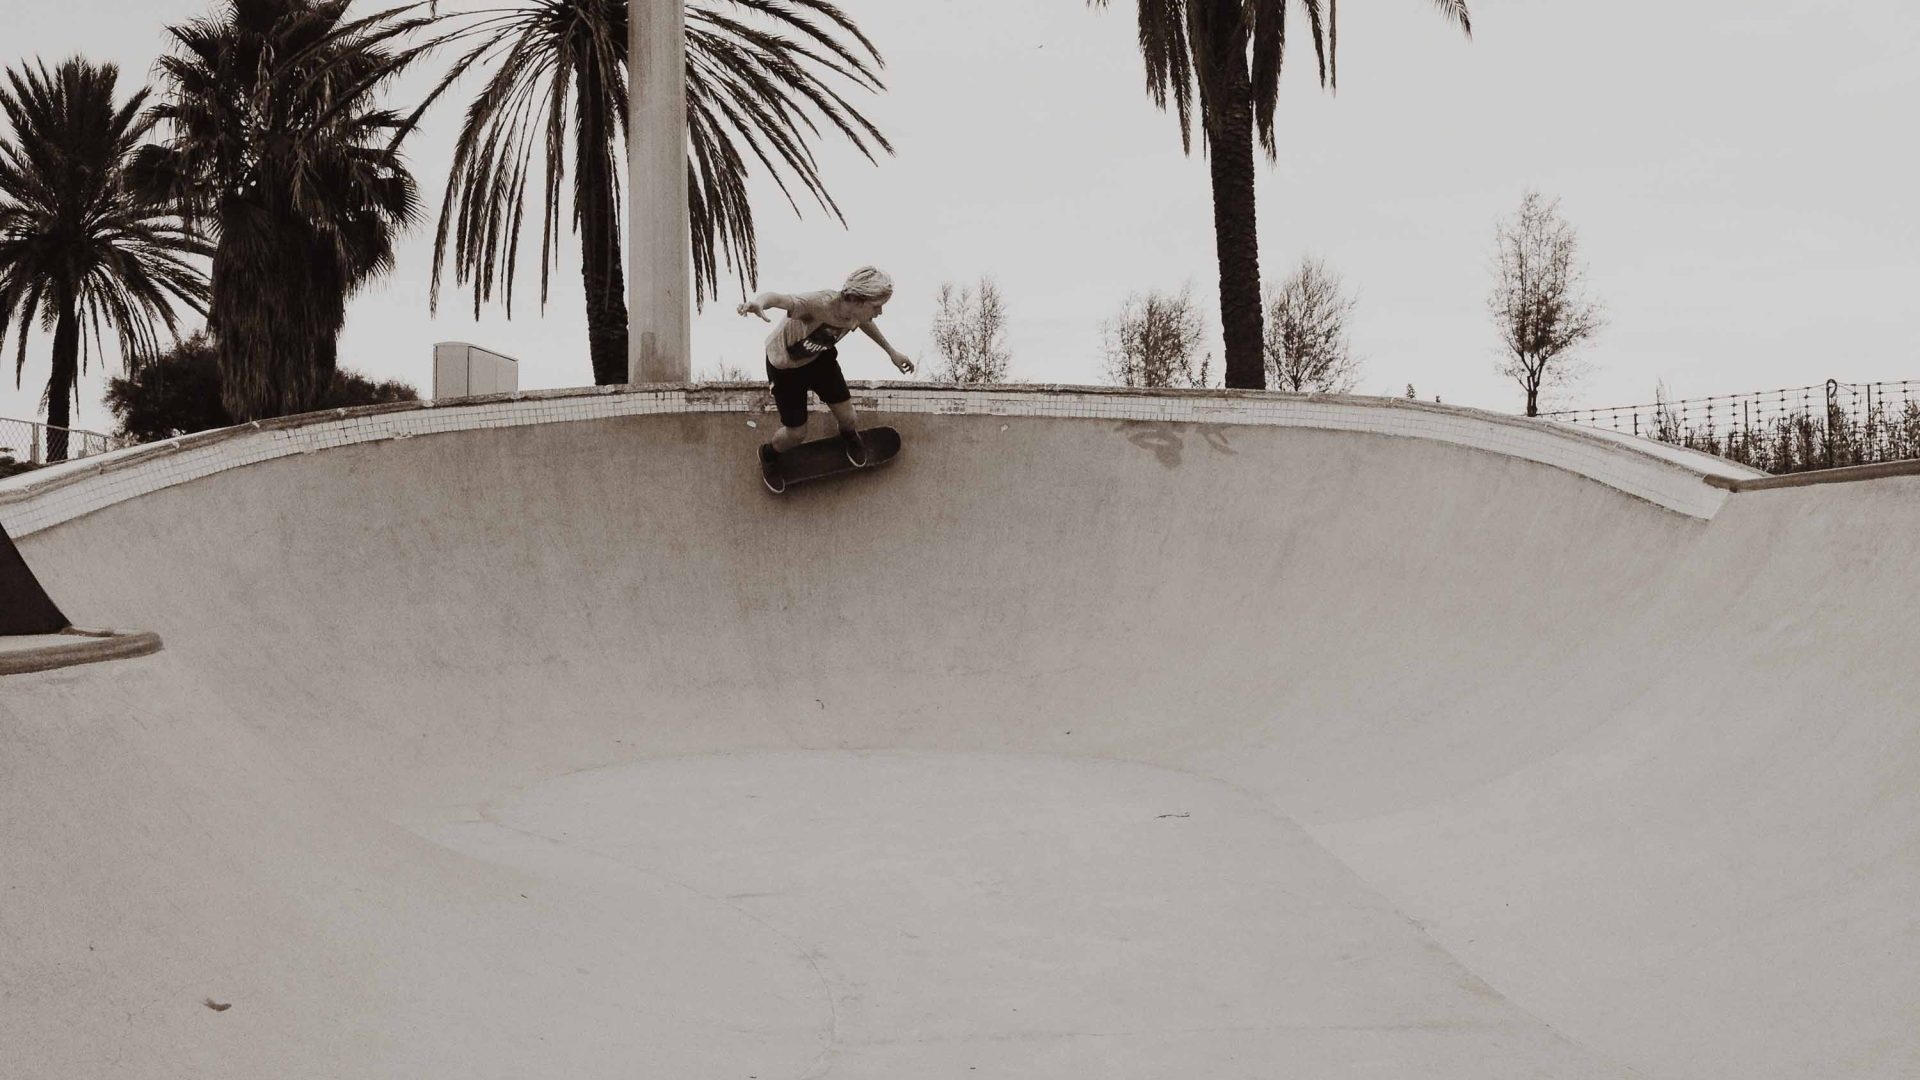 A single skater at a ramp which is backed by Palm Trees.